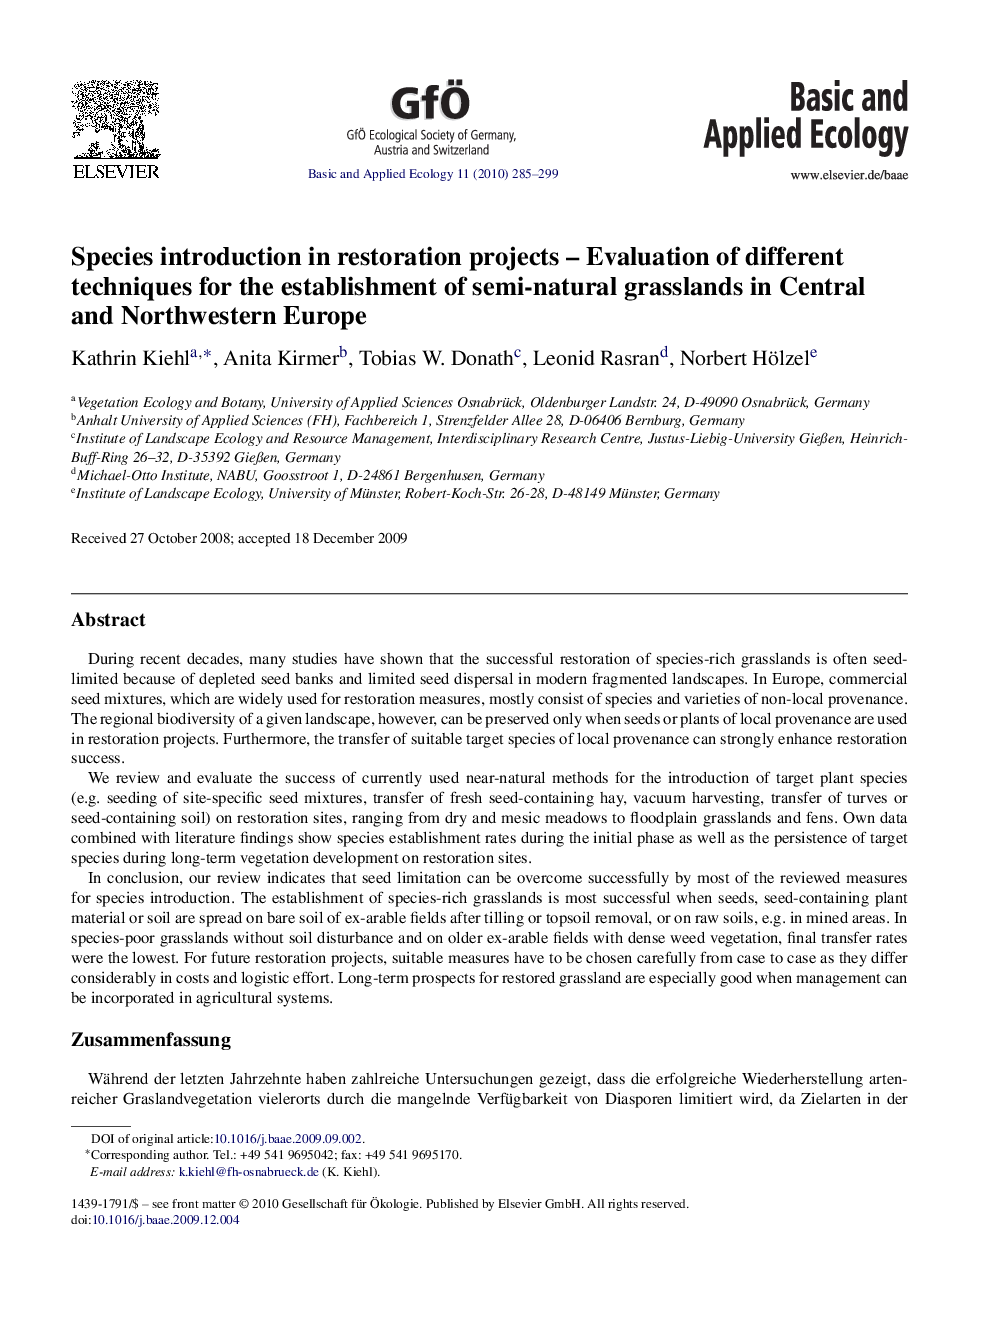 Species introduction in restoration projects – Evaluation of different techniques for the establishment of semi-natural grasslands in Central and Northwestern Europe